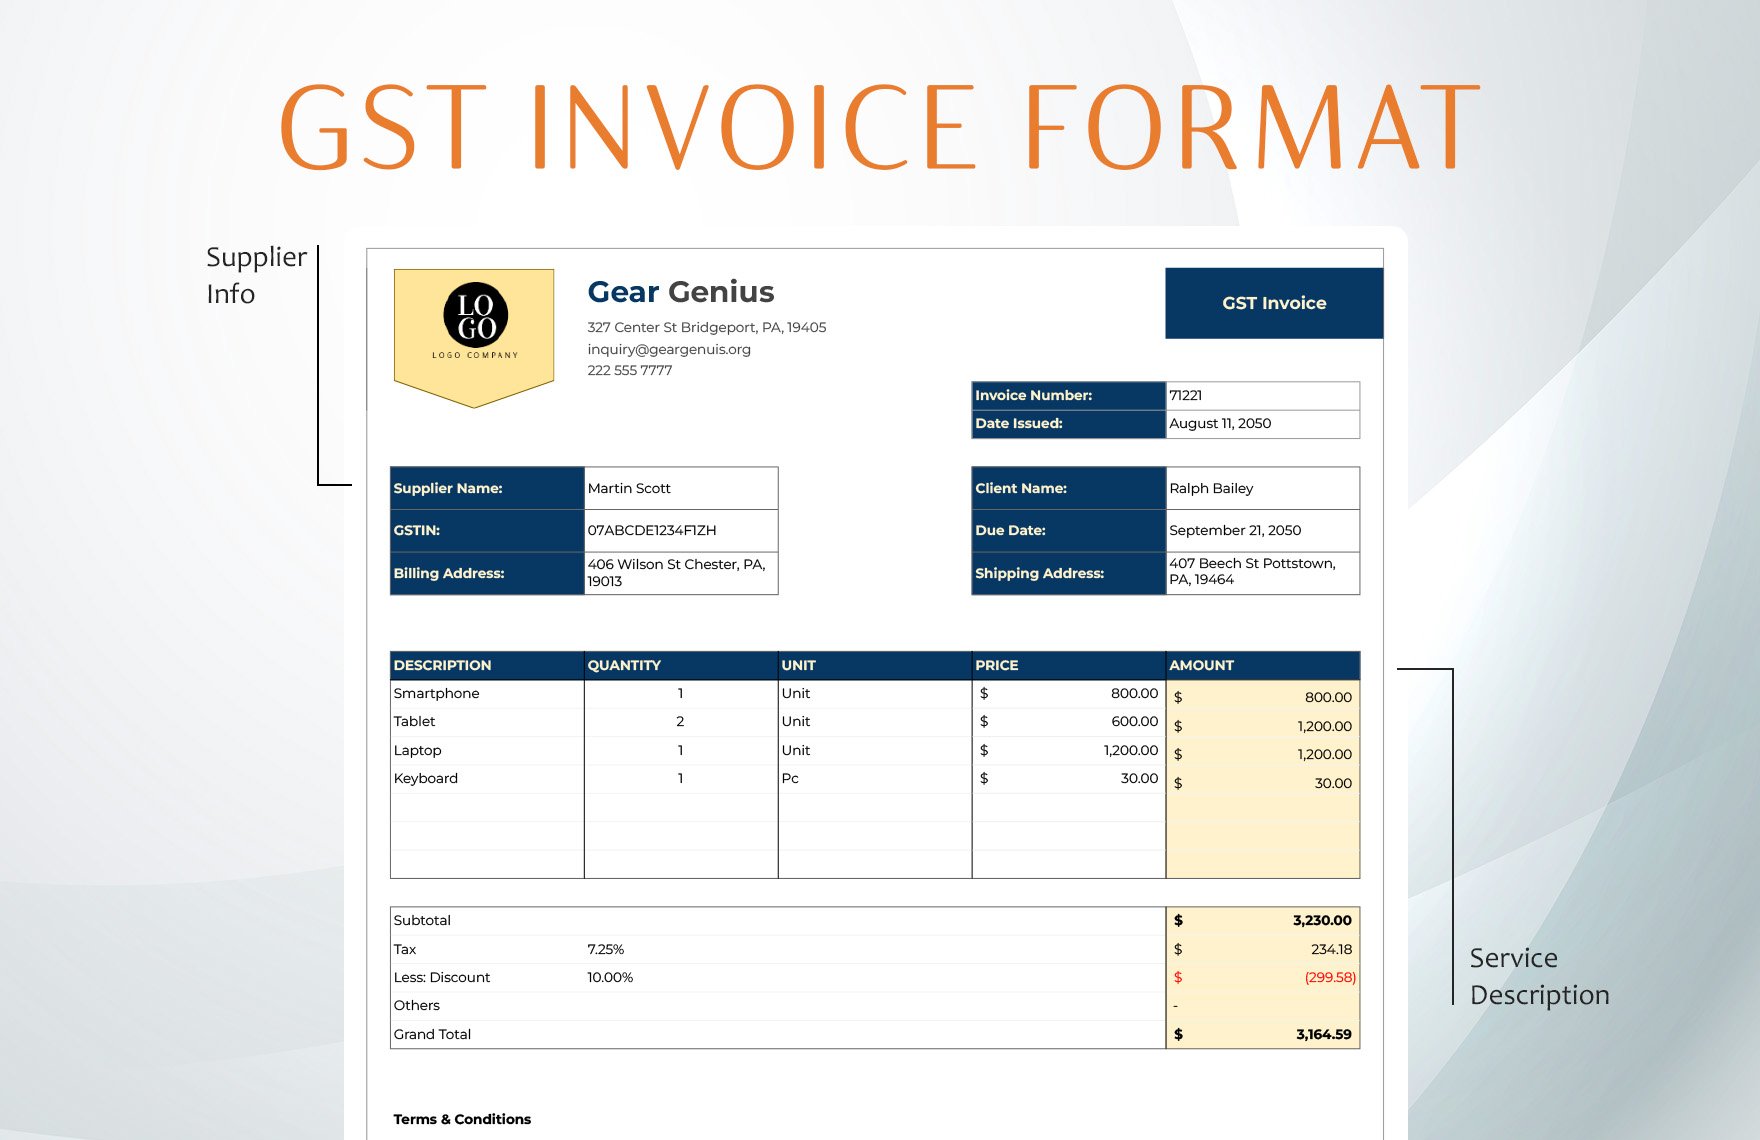 Gst Invoice Format Template